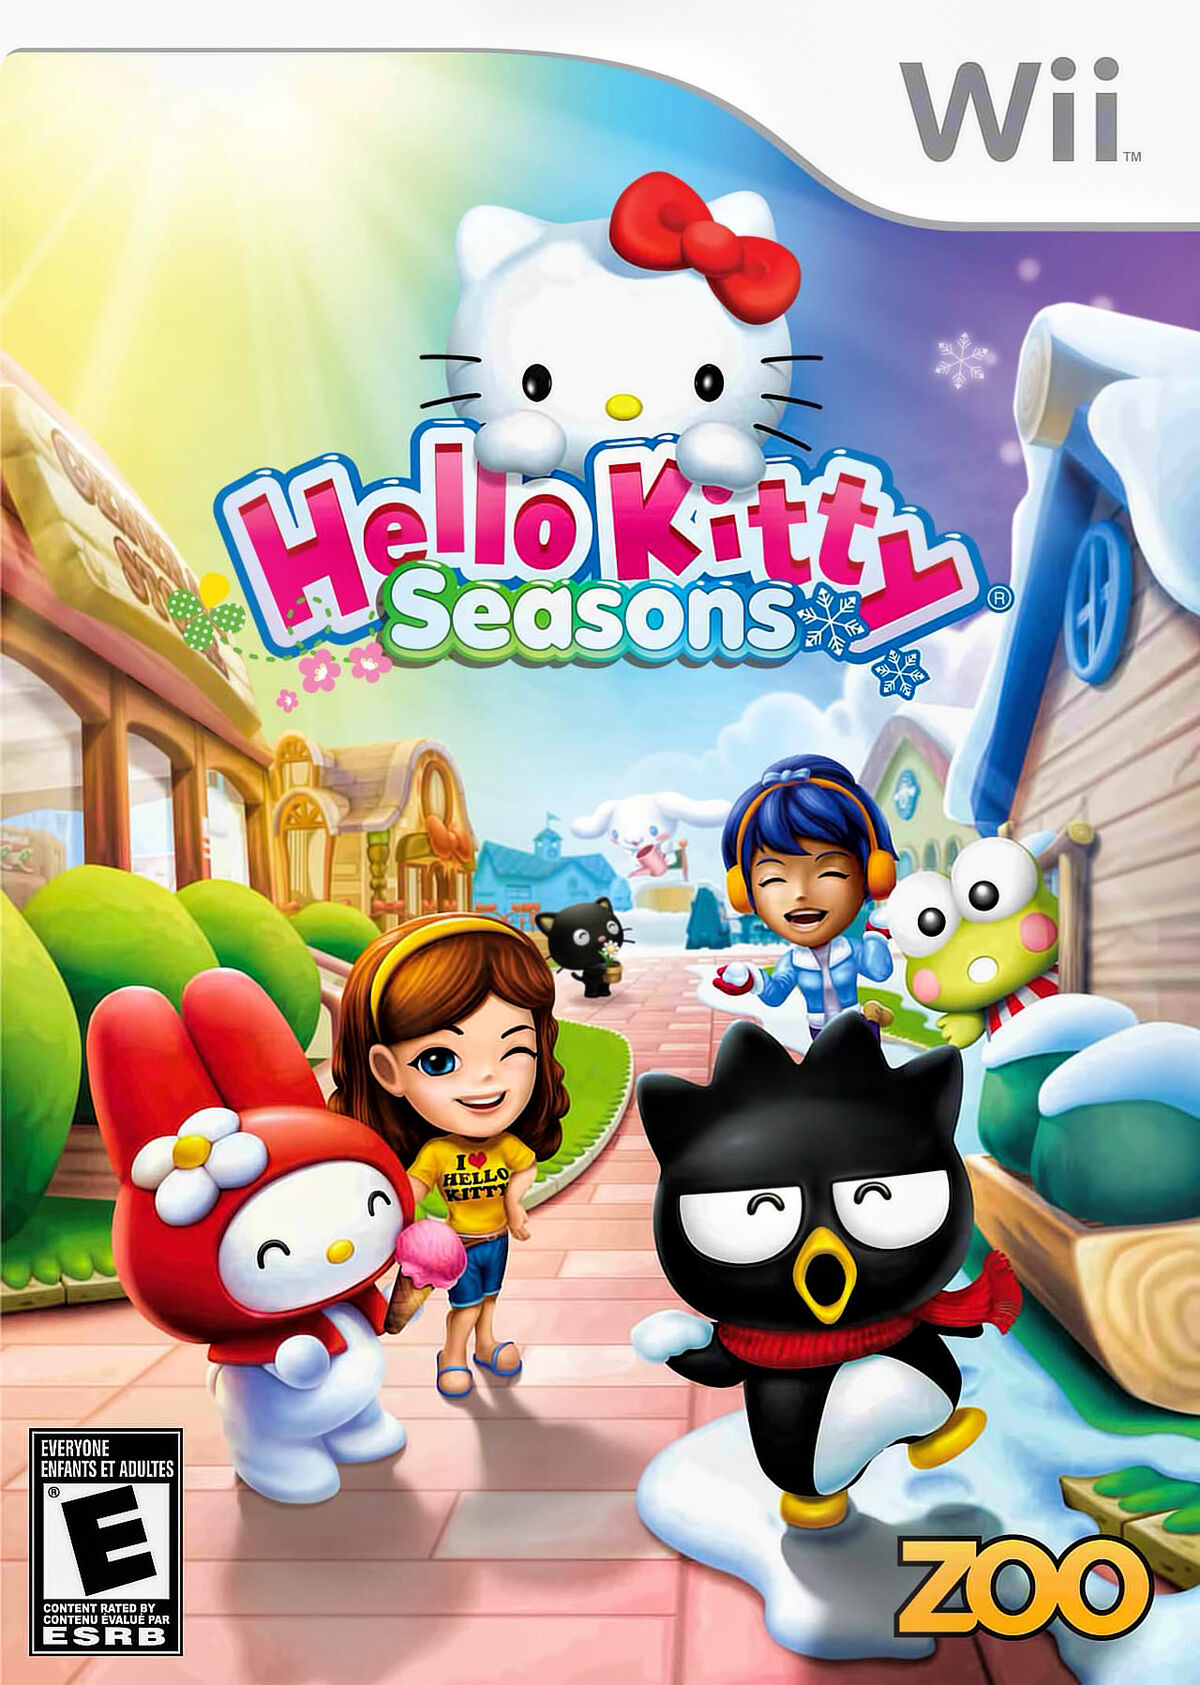 https://static.wikia.nocookie.net/gamegrumps/images/e/e5/HelloKittySeasonsCover.jpg/revision/latest/scale-to-width-down/1200?cb=20140103152532